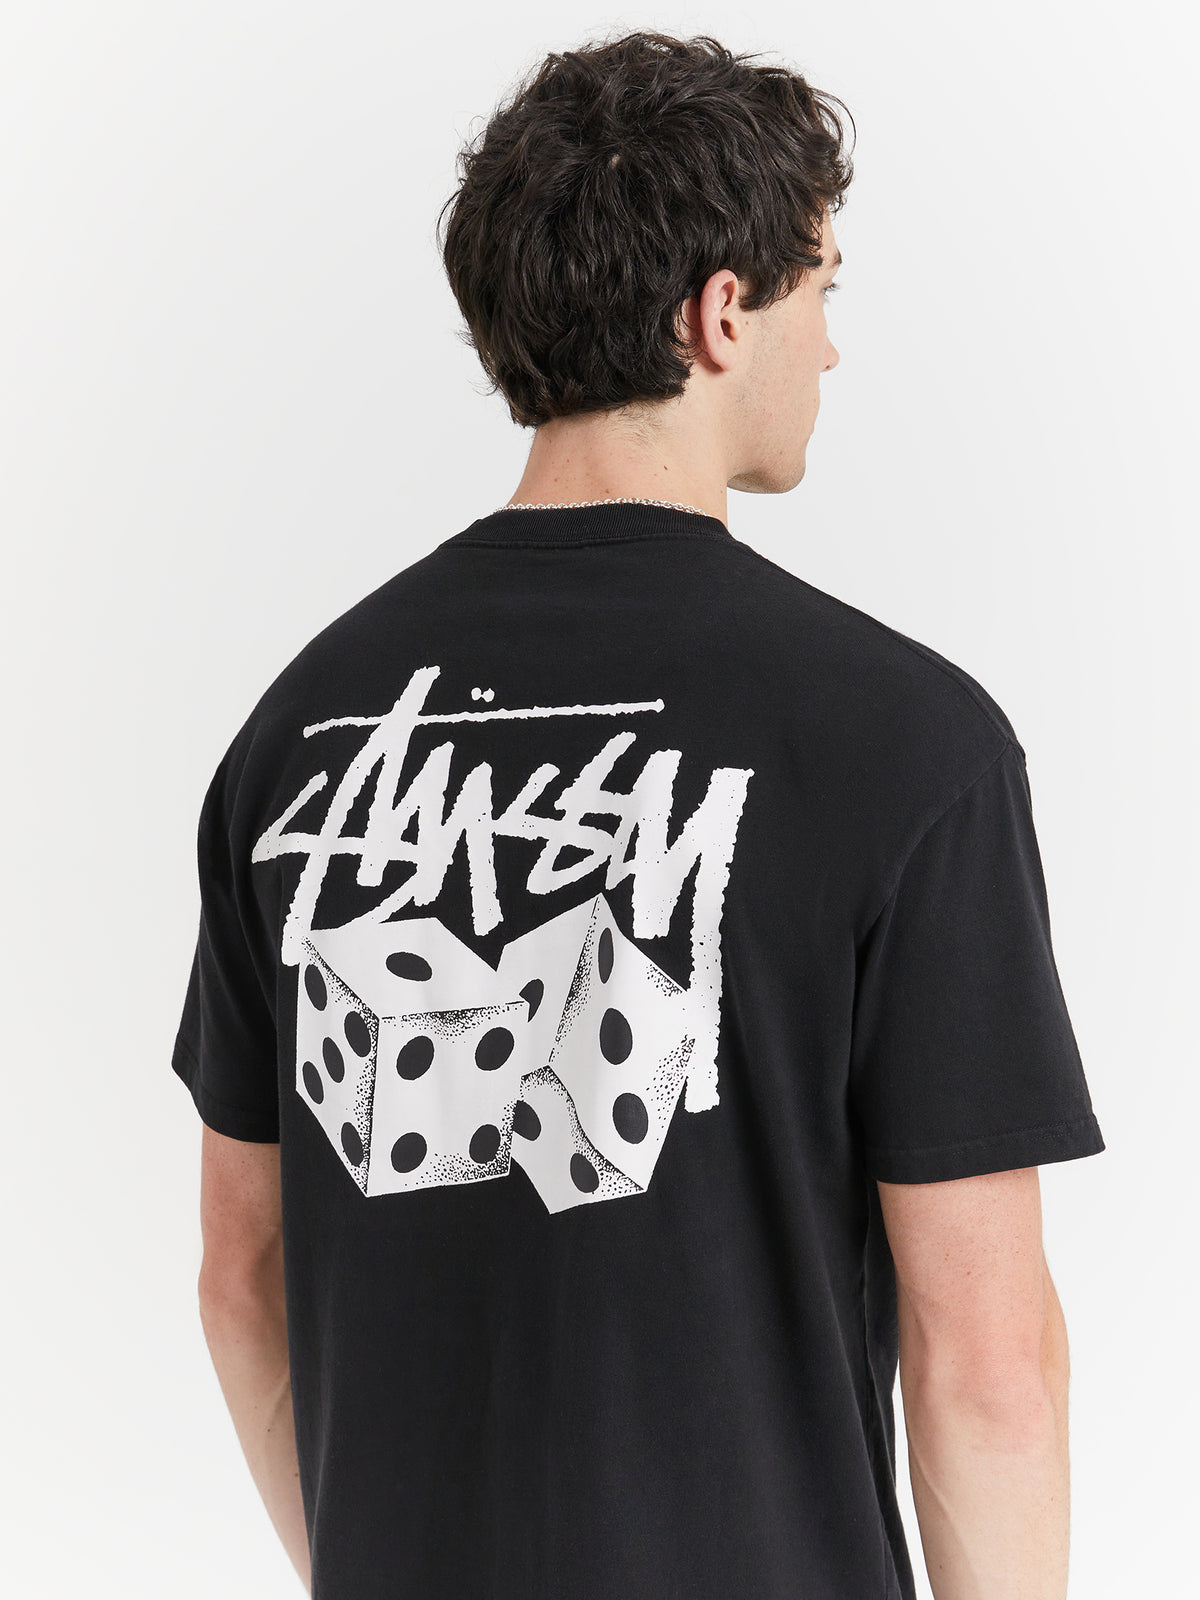 Pair Of Dice Heavyweight T-Shirt in Pigment Black